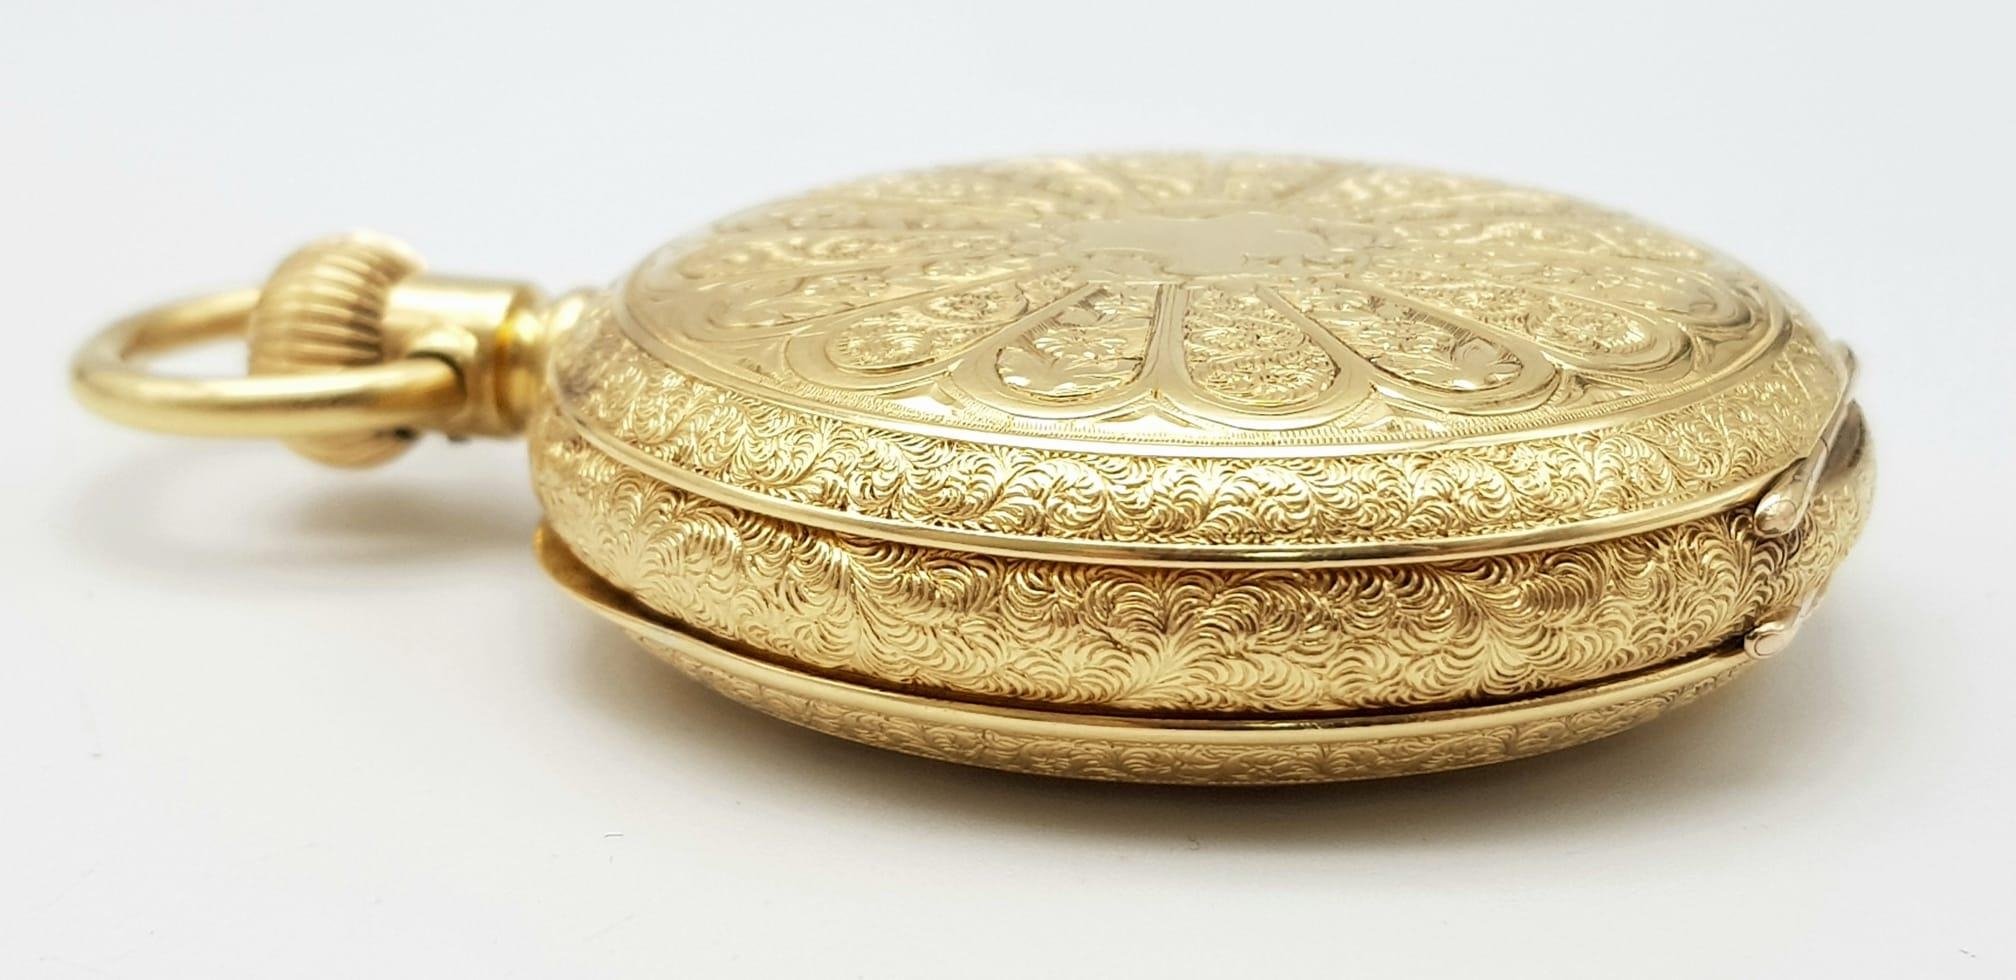 An Antique Waltham 18K Gold Full Hunter Pocket Watch. The case is ornately decorated in a floral - Image 11 of 13